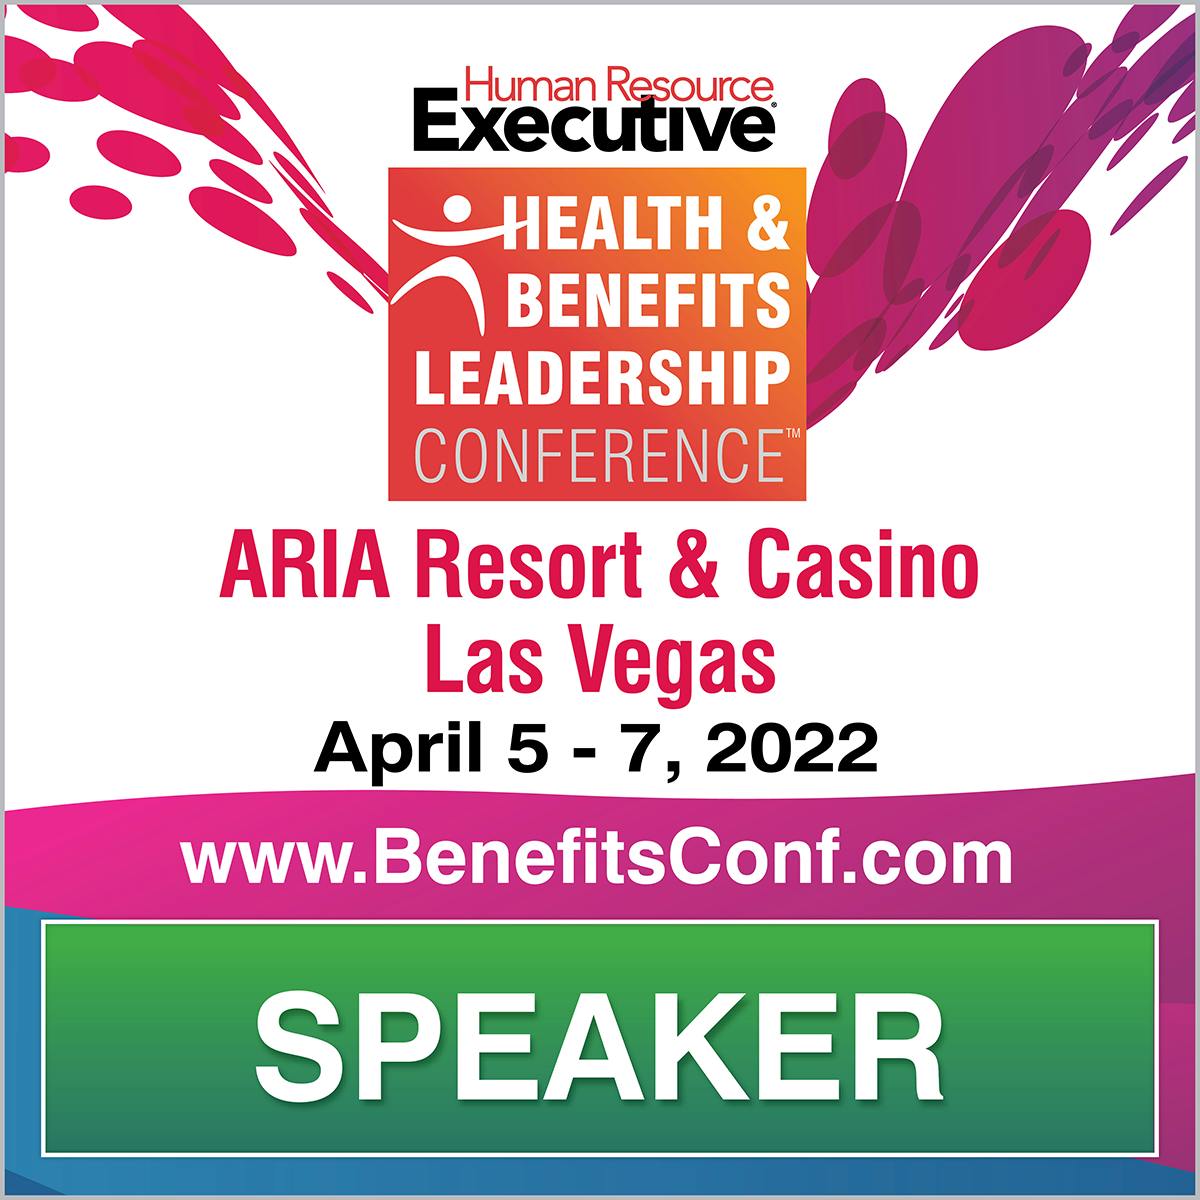 Event HRE Health & Benefits Leadership Conference